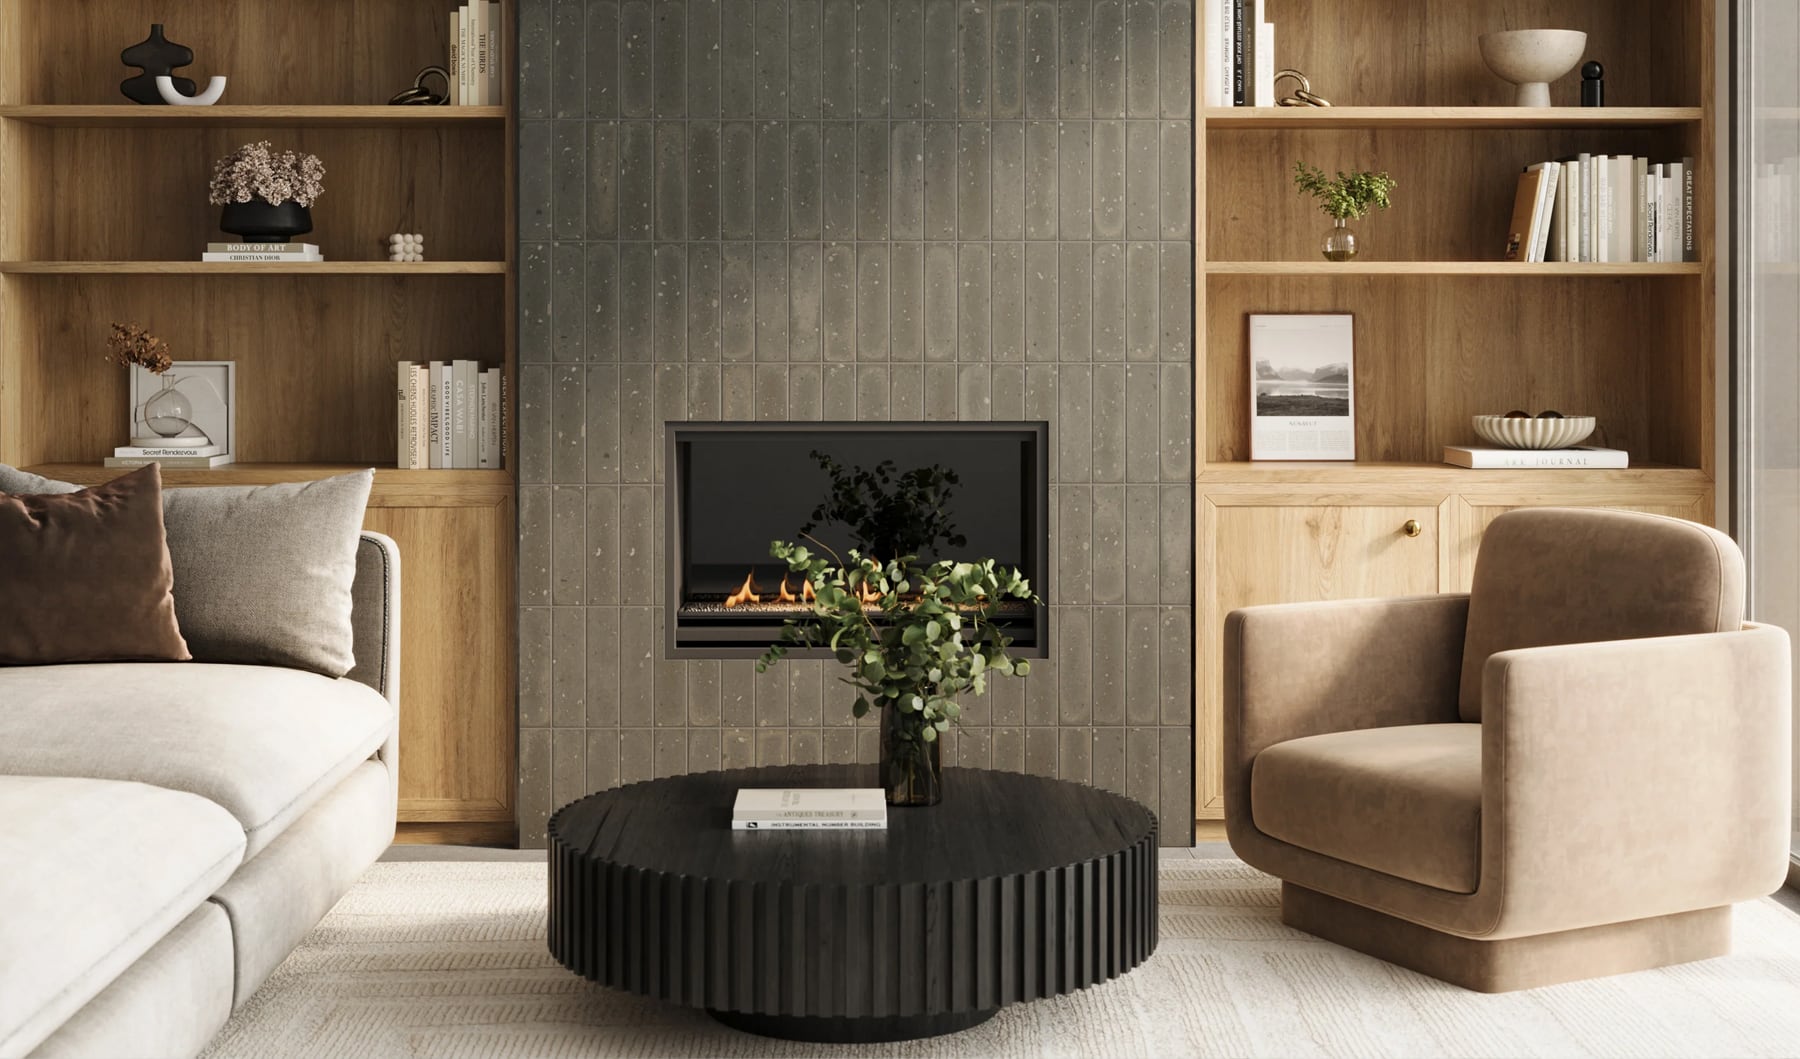 Soothing ambiance with charcoal-hued, brick look tile framing a cozy fireplace, harmonizing with the warm wood tones